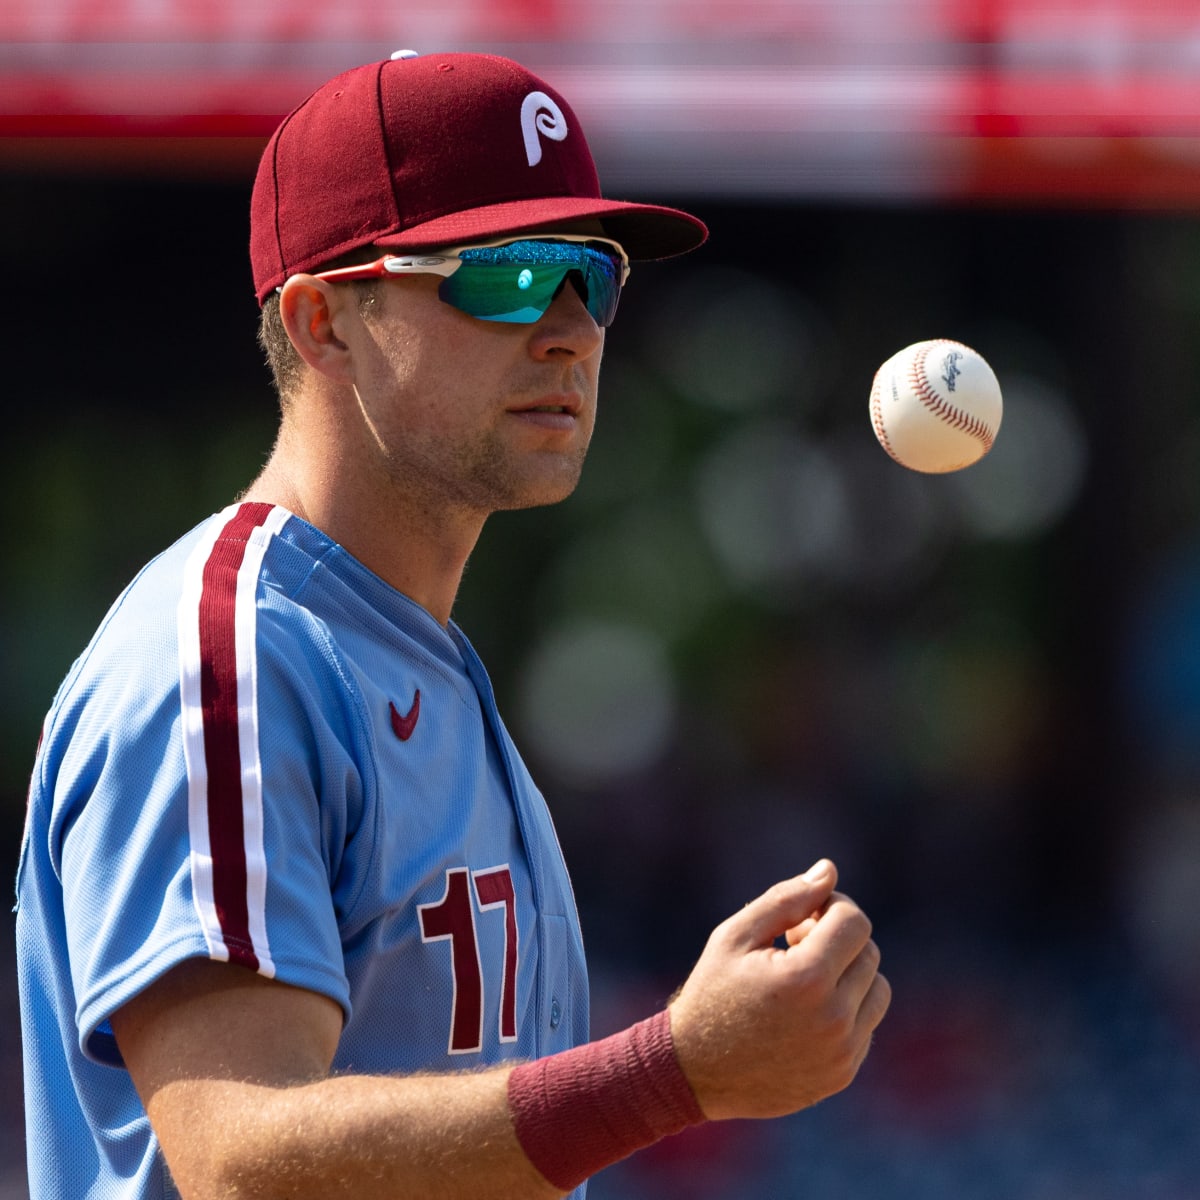 Rhys Hoskins: Inside the insane numbers - The Good Phight